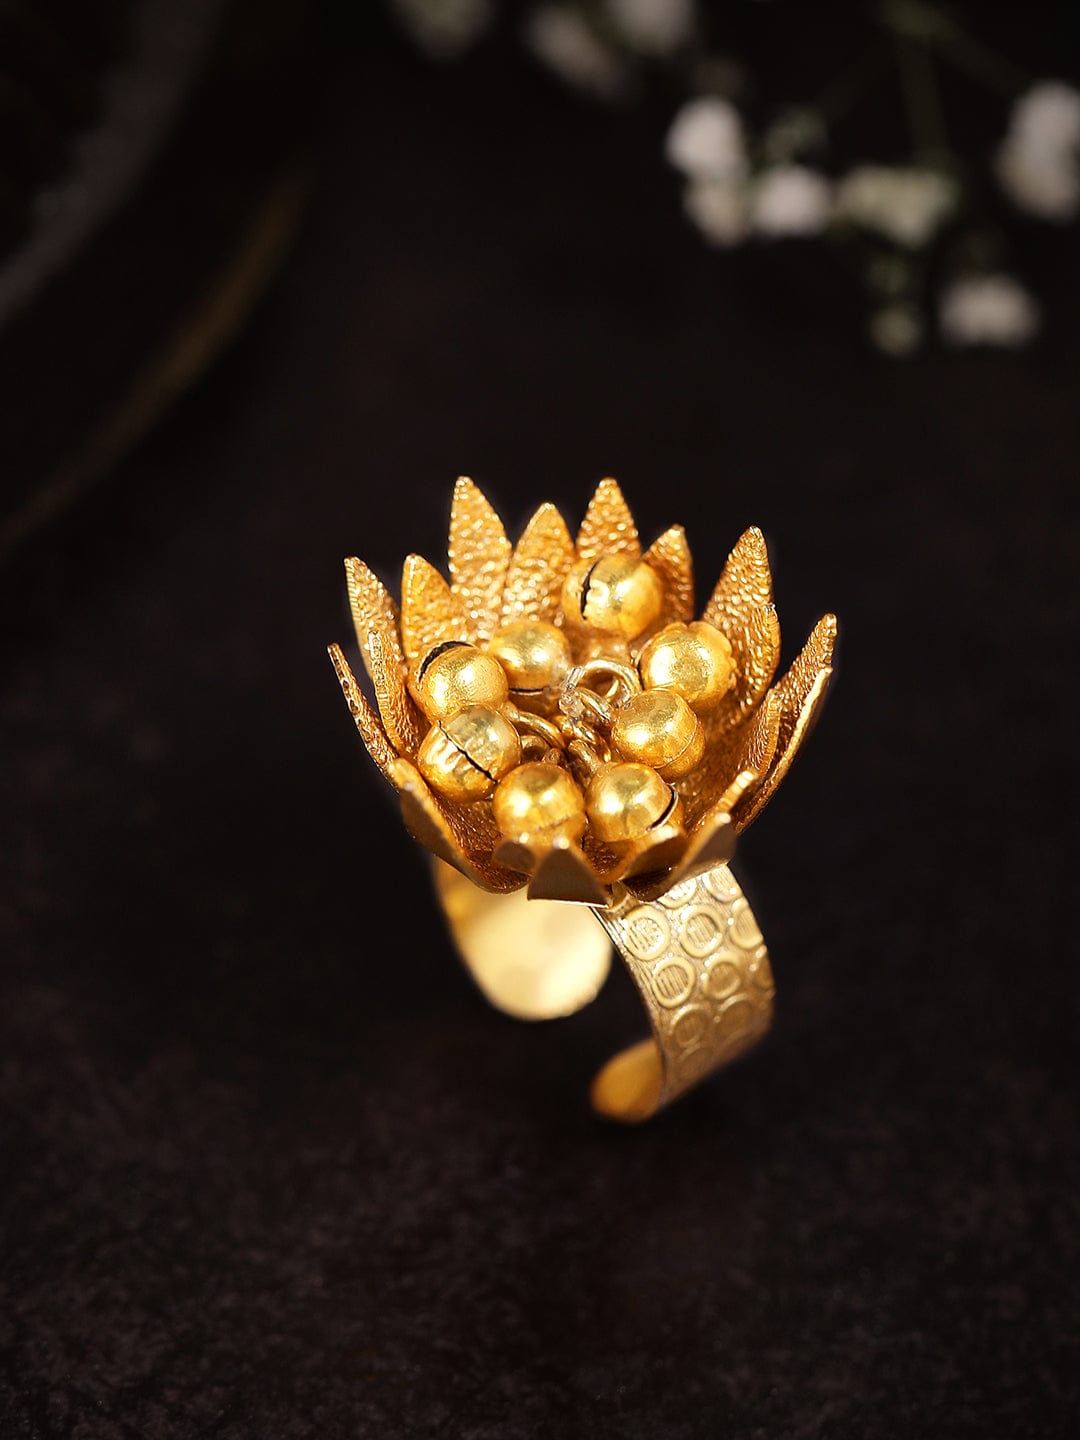 Rubans 24K Gold Plated Ring With Golden Beads And Floral Design Rings